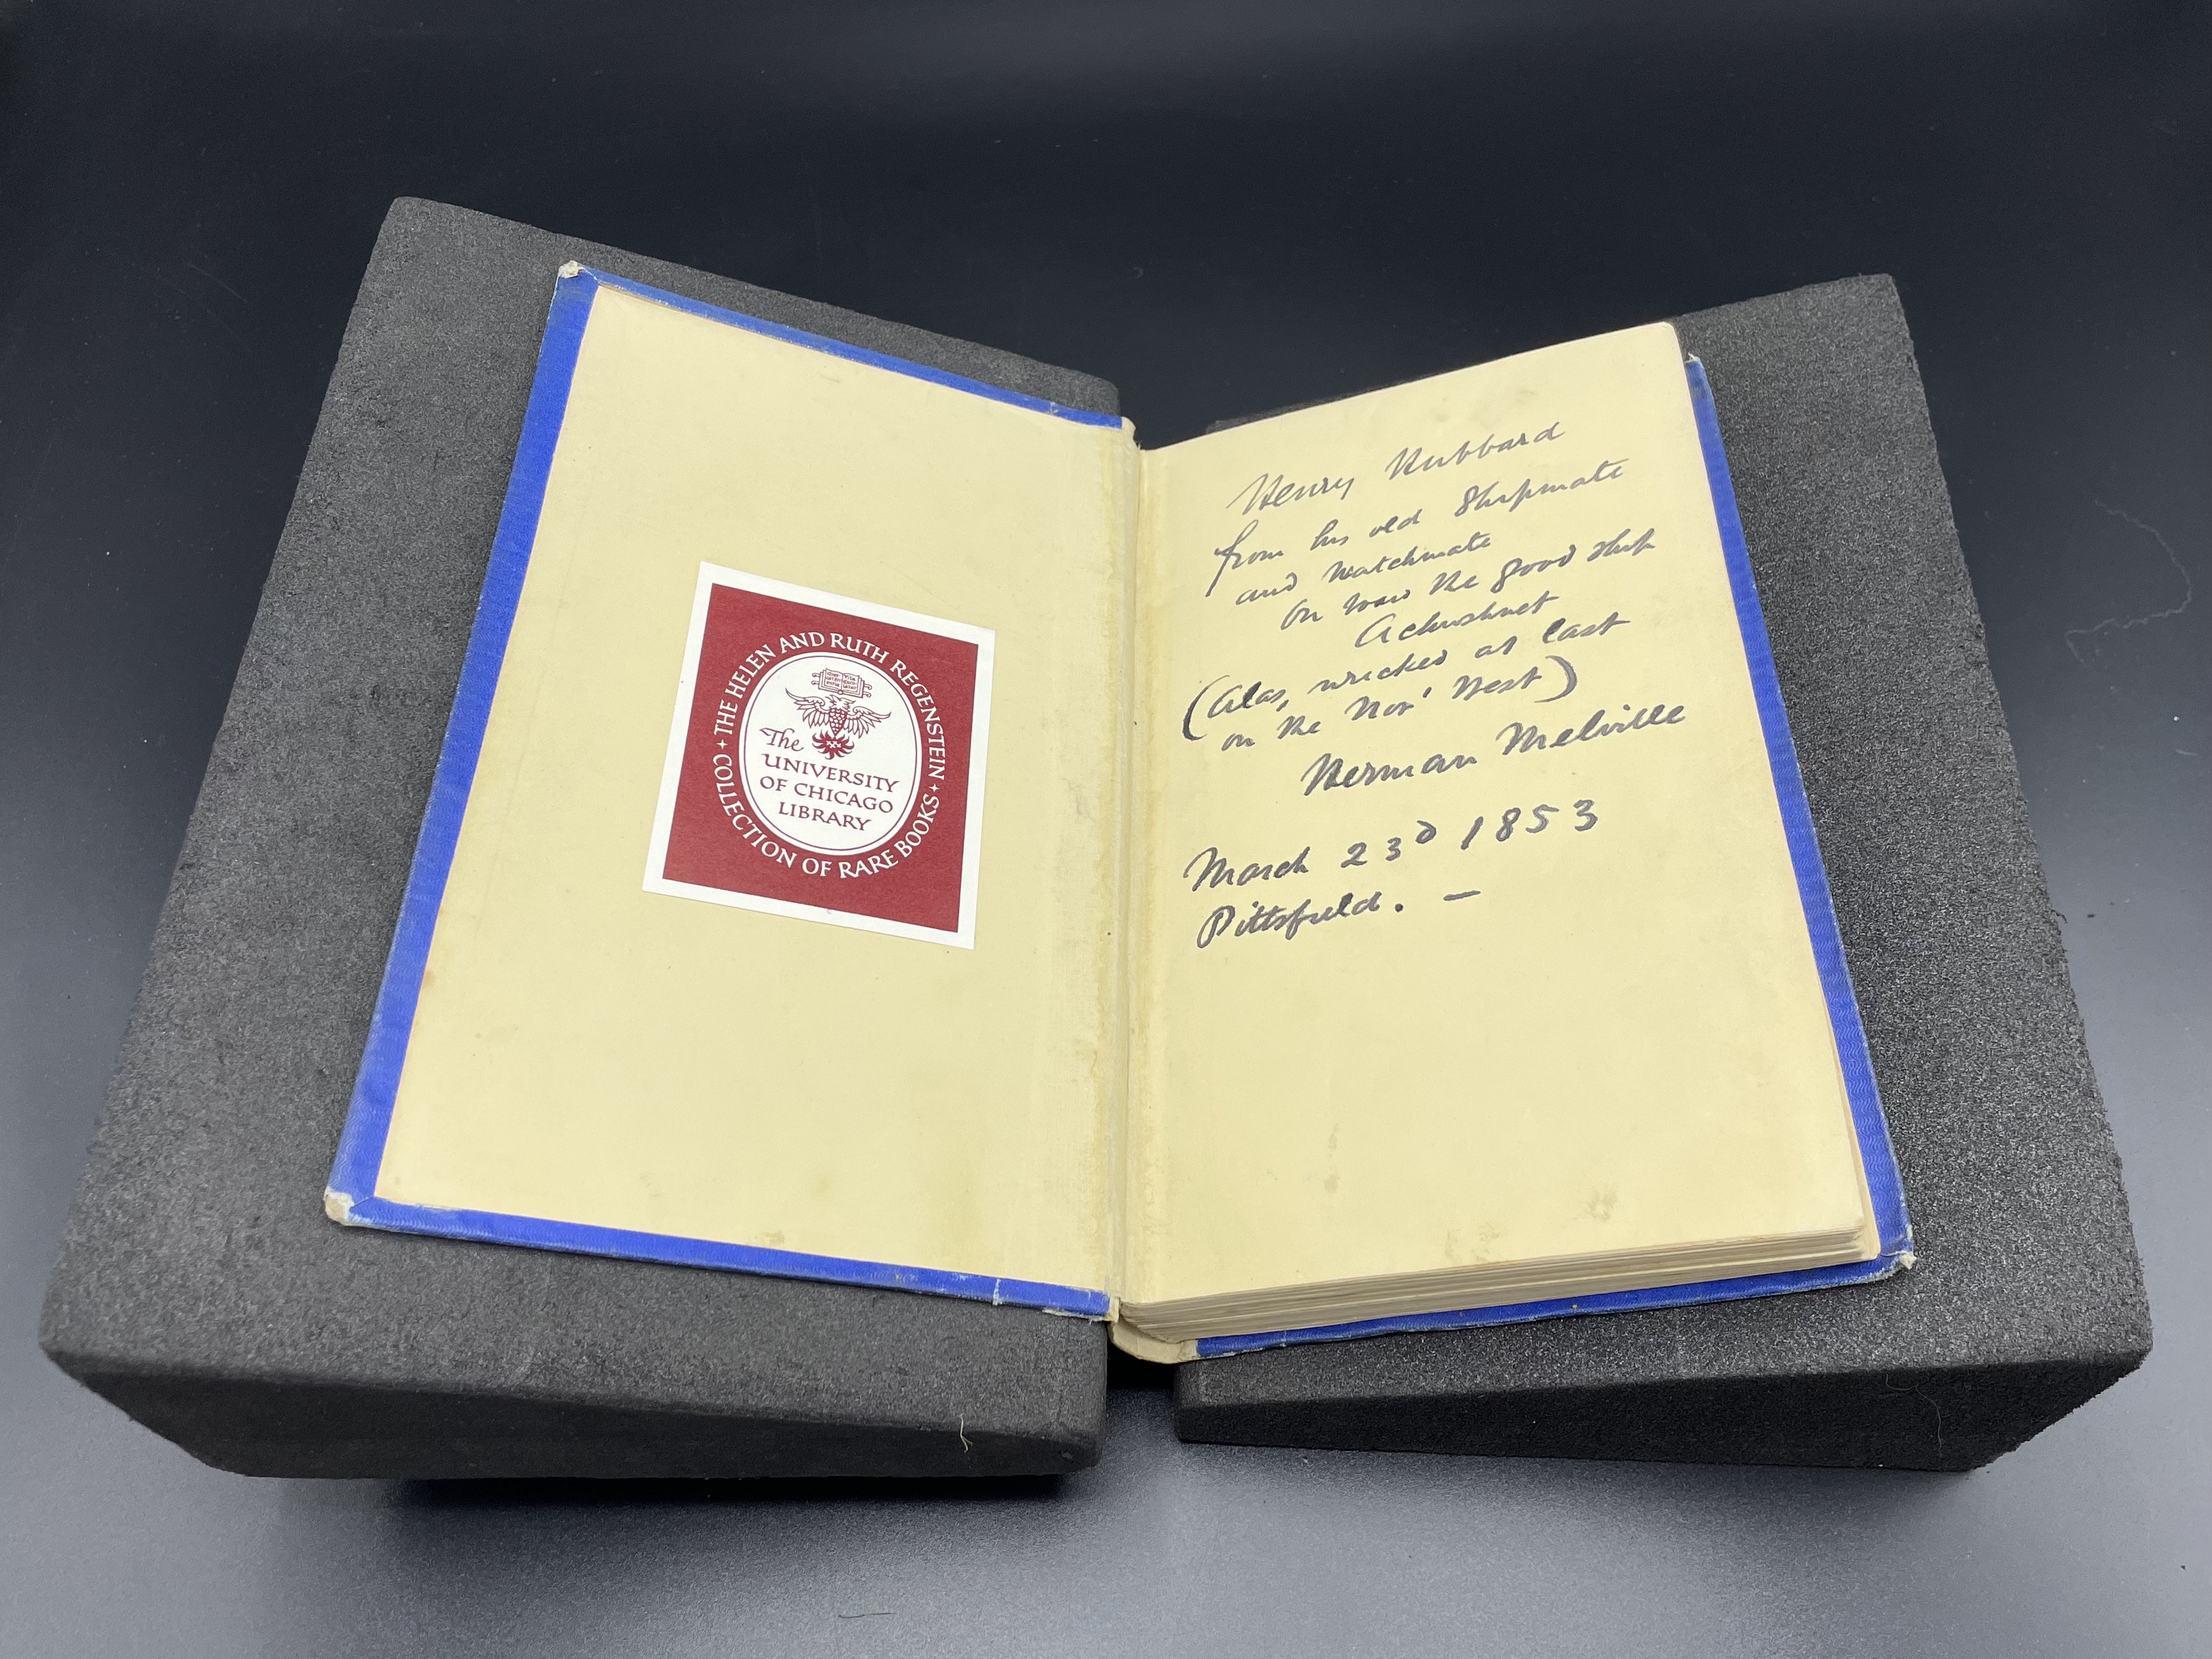 This book features a flyleaf inscription from Herman Melville. The inscription reads: "Henry Hubbard from his old shipmate and watchmate on board the good ship Acushnet (Alas, wrecked at last on the Nor'west) Herman Melville March 23rd, 1853 Pittsfield."